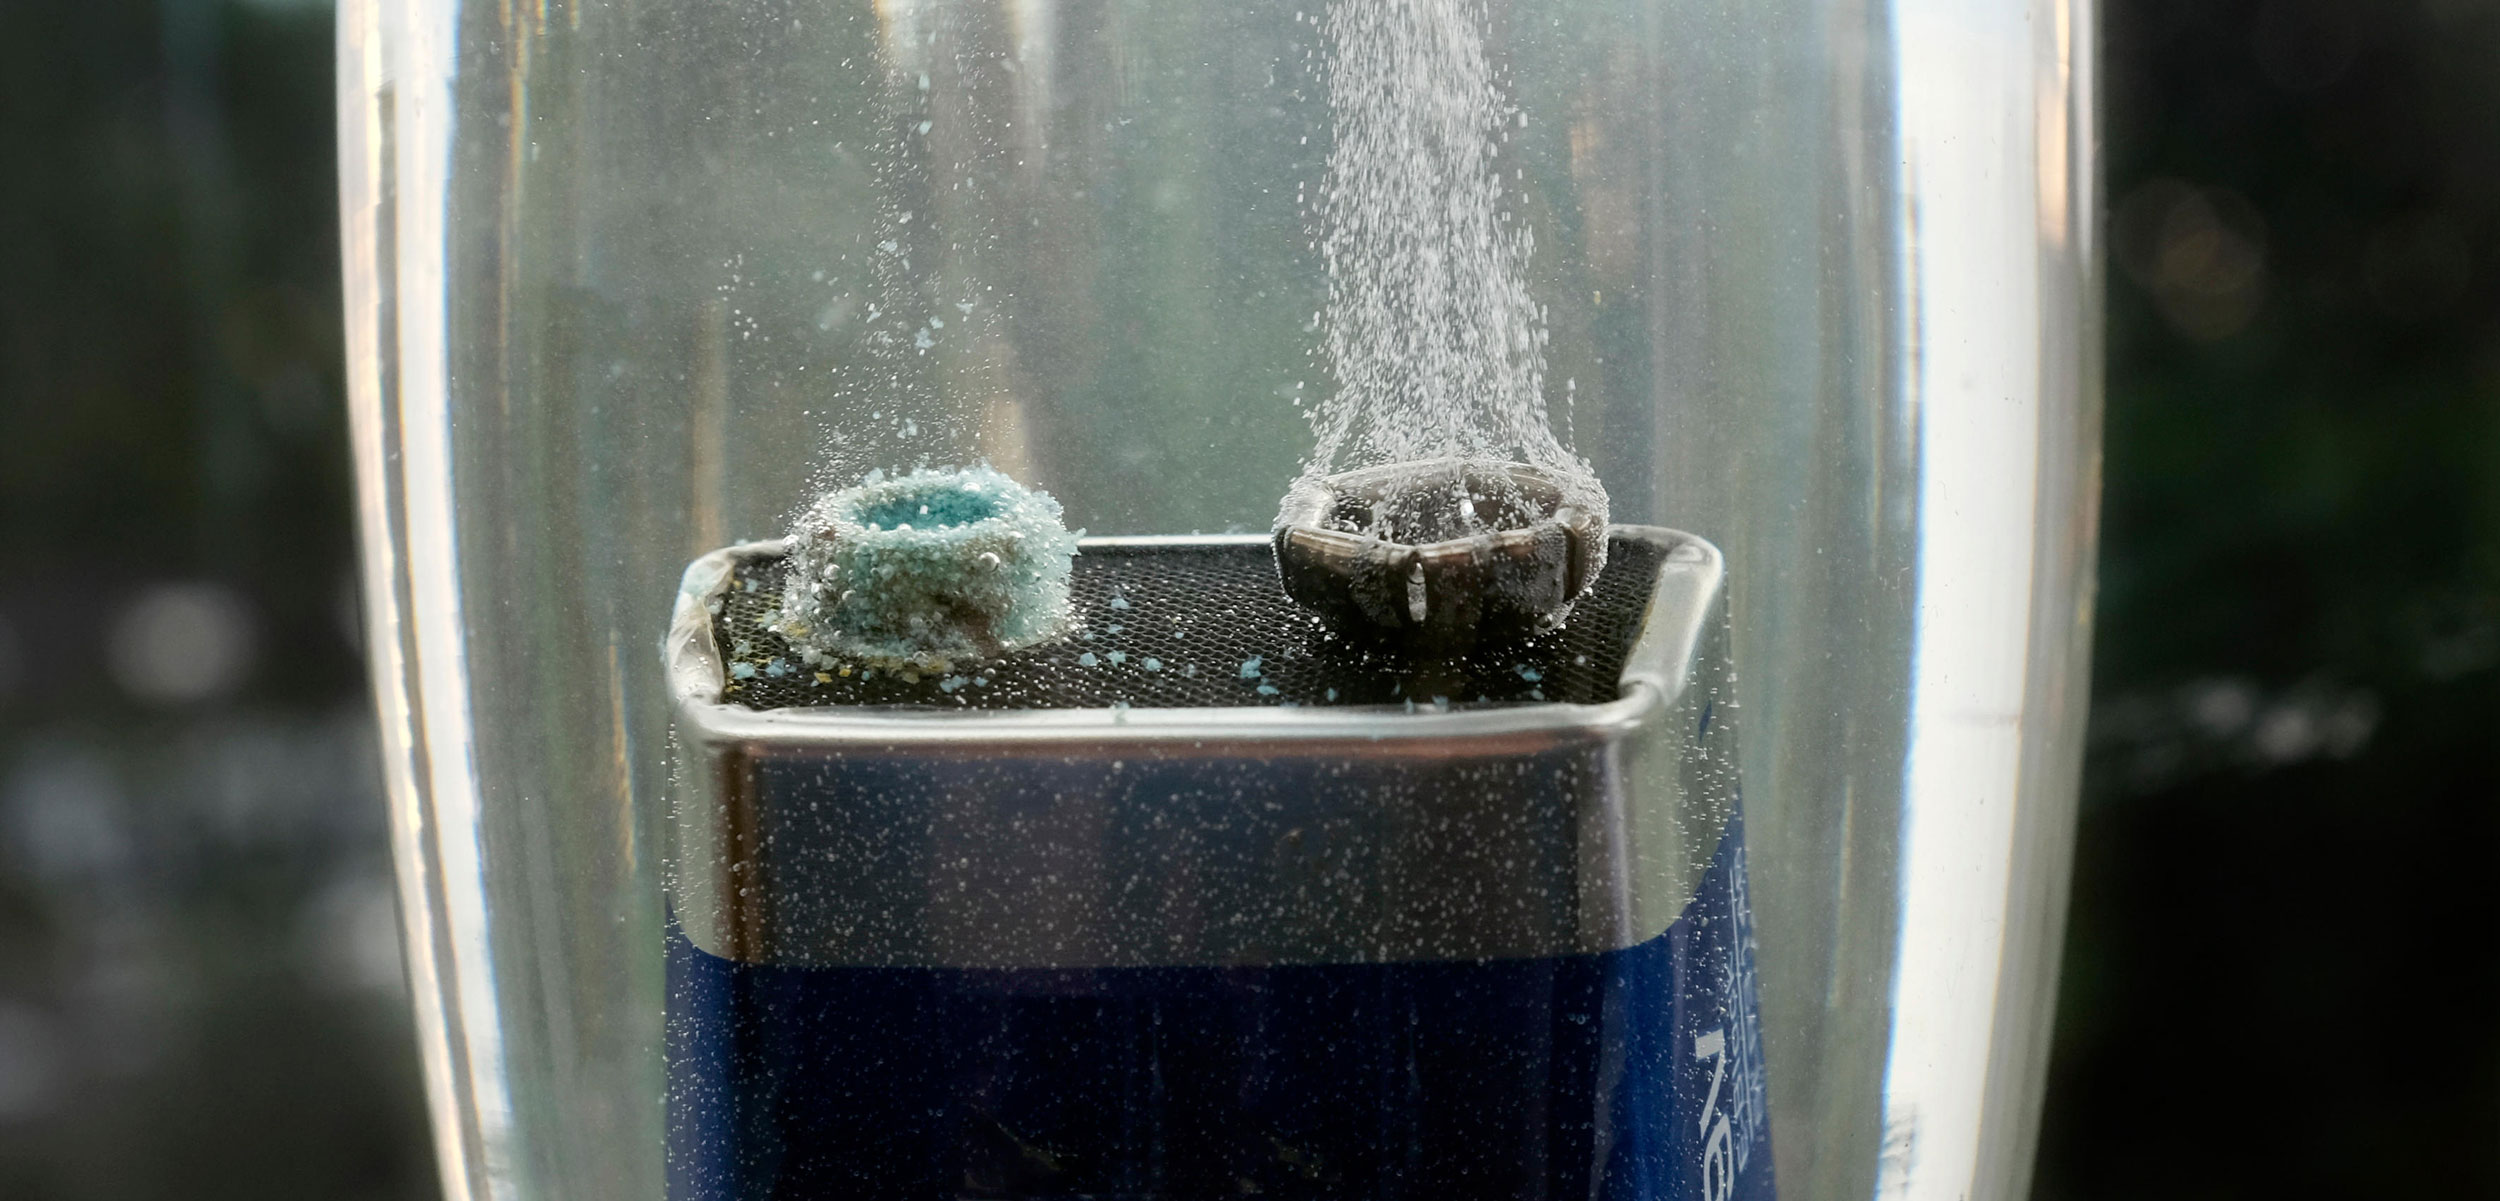 hydrogen bubbling off a submerged battery